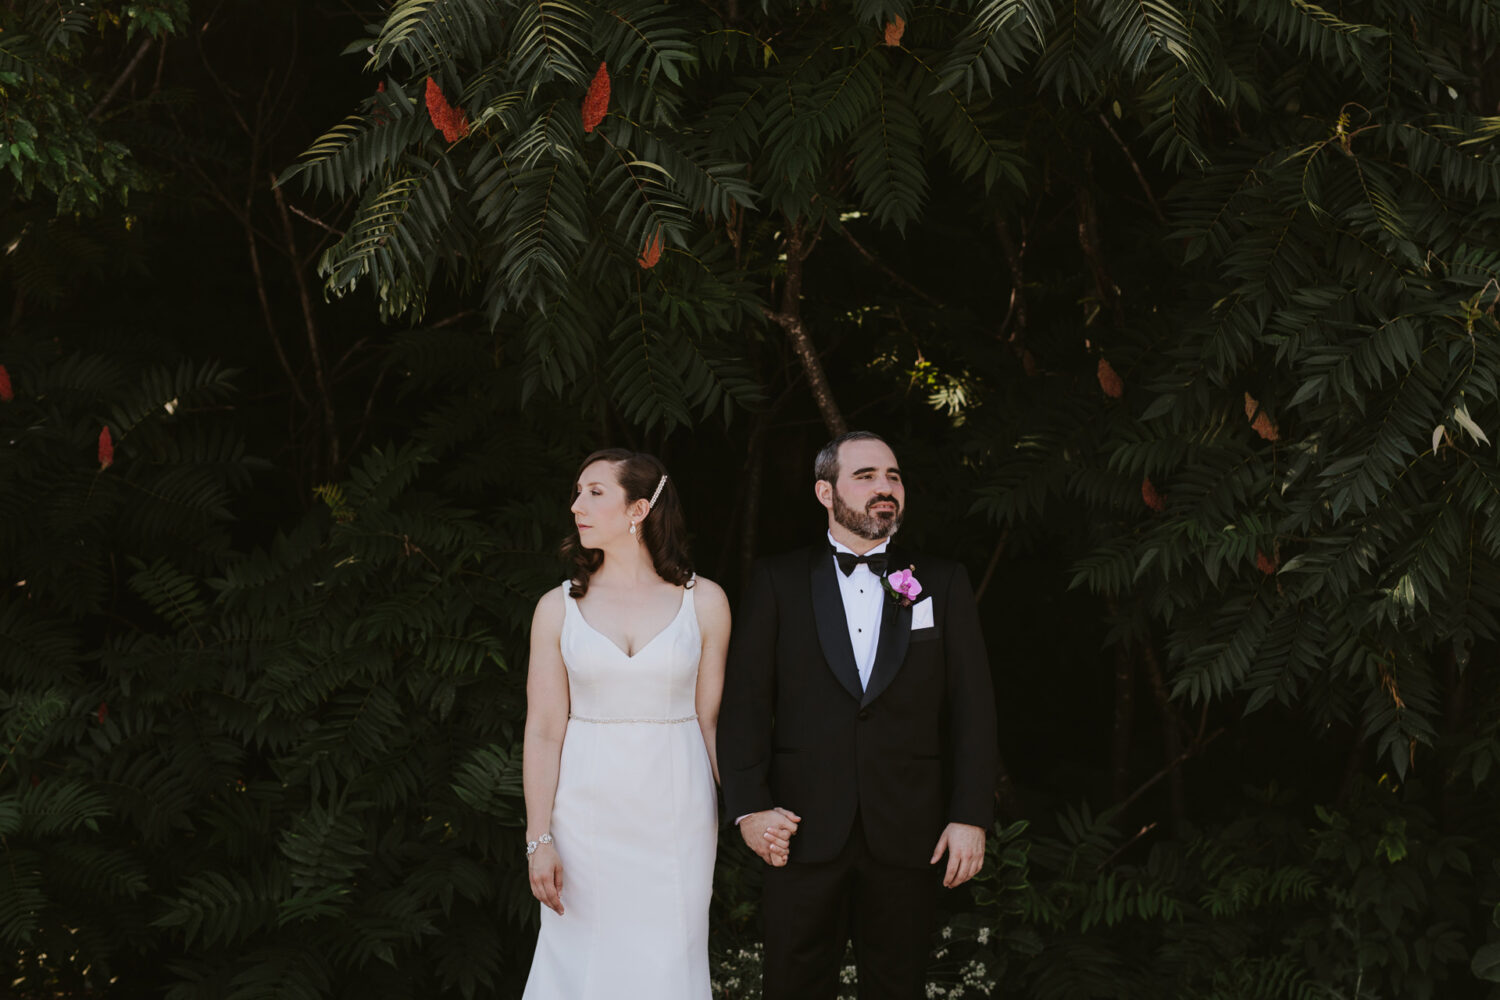 Formal portrait of bride and groom standing under tropical plants